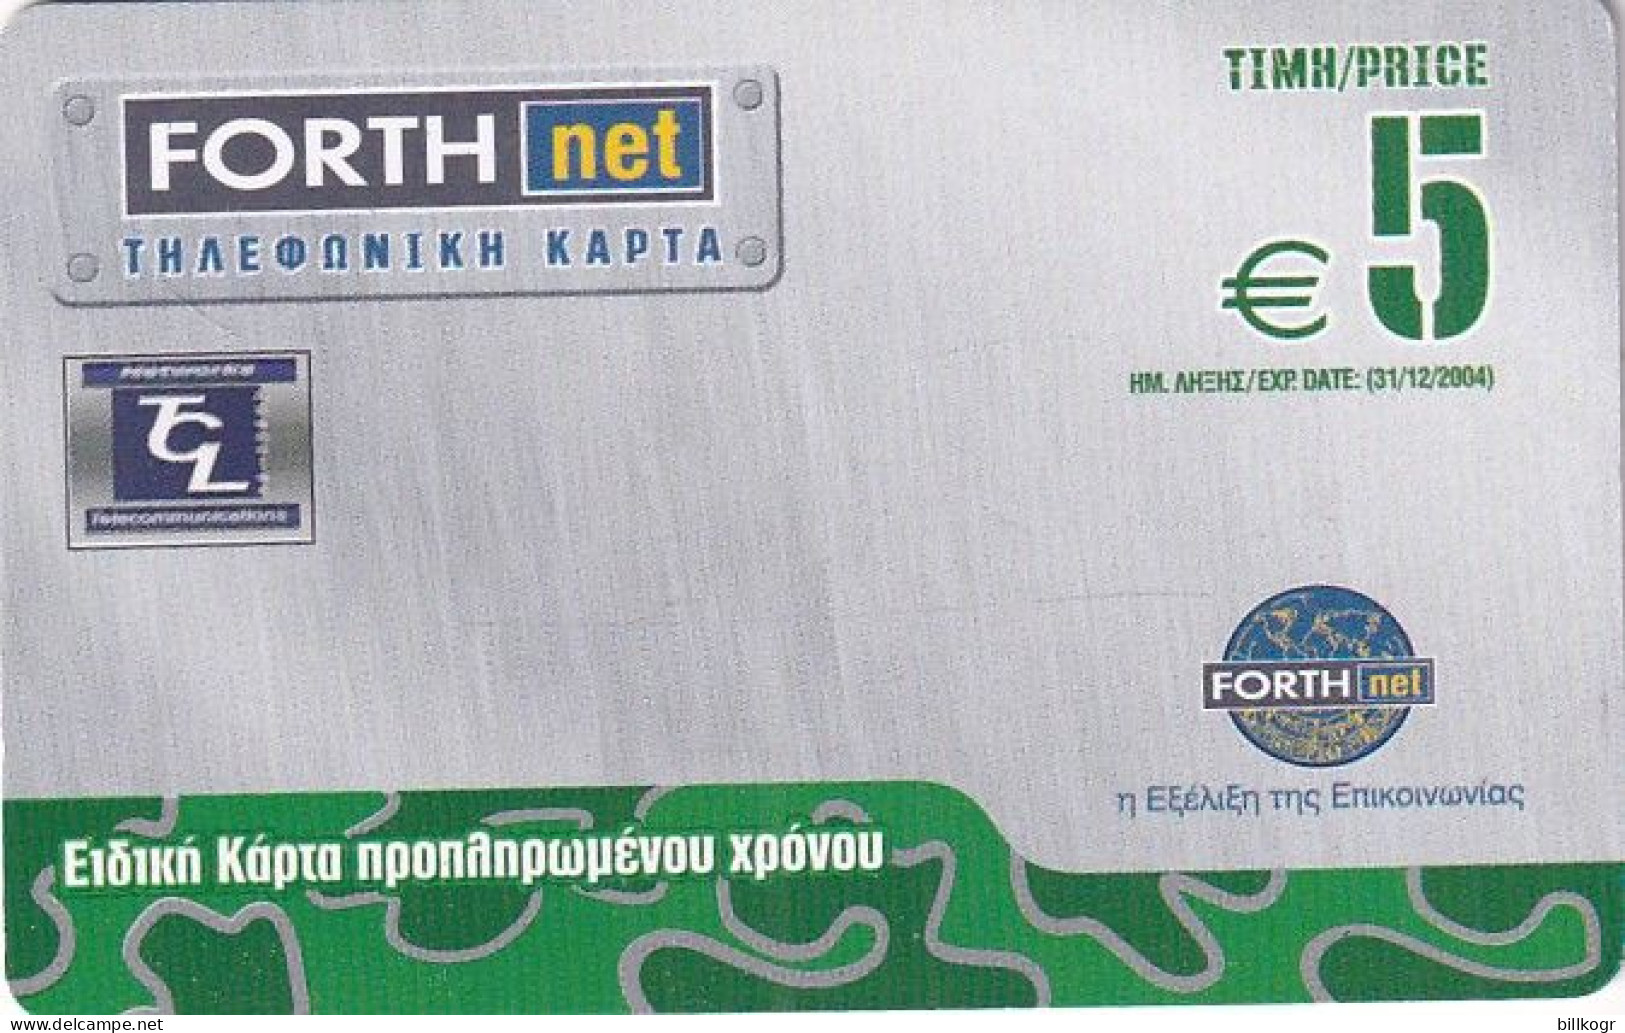 GREECE - Forthnet Telephony Magnetic Telecard, First Issue 5 Euro, Sample - Grecia